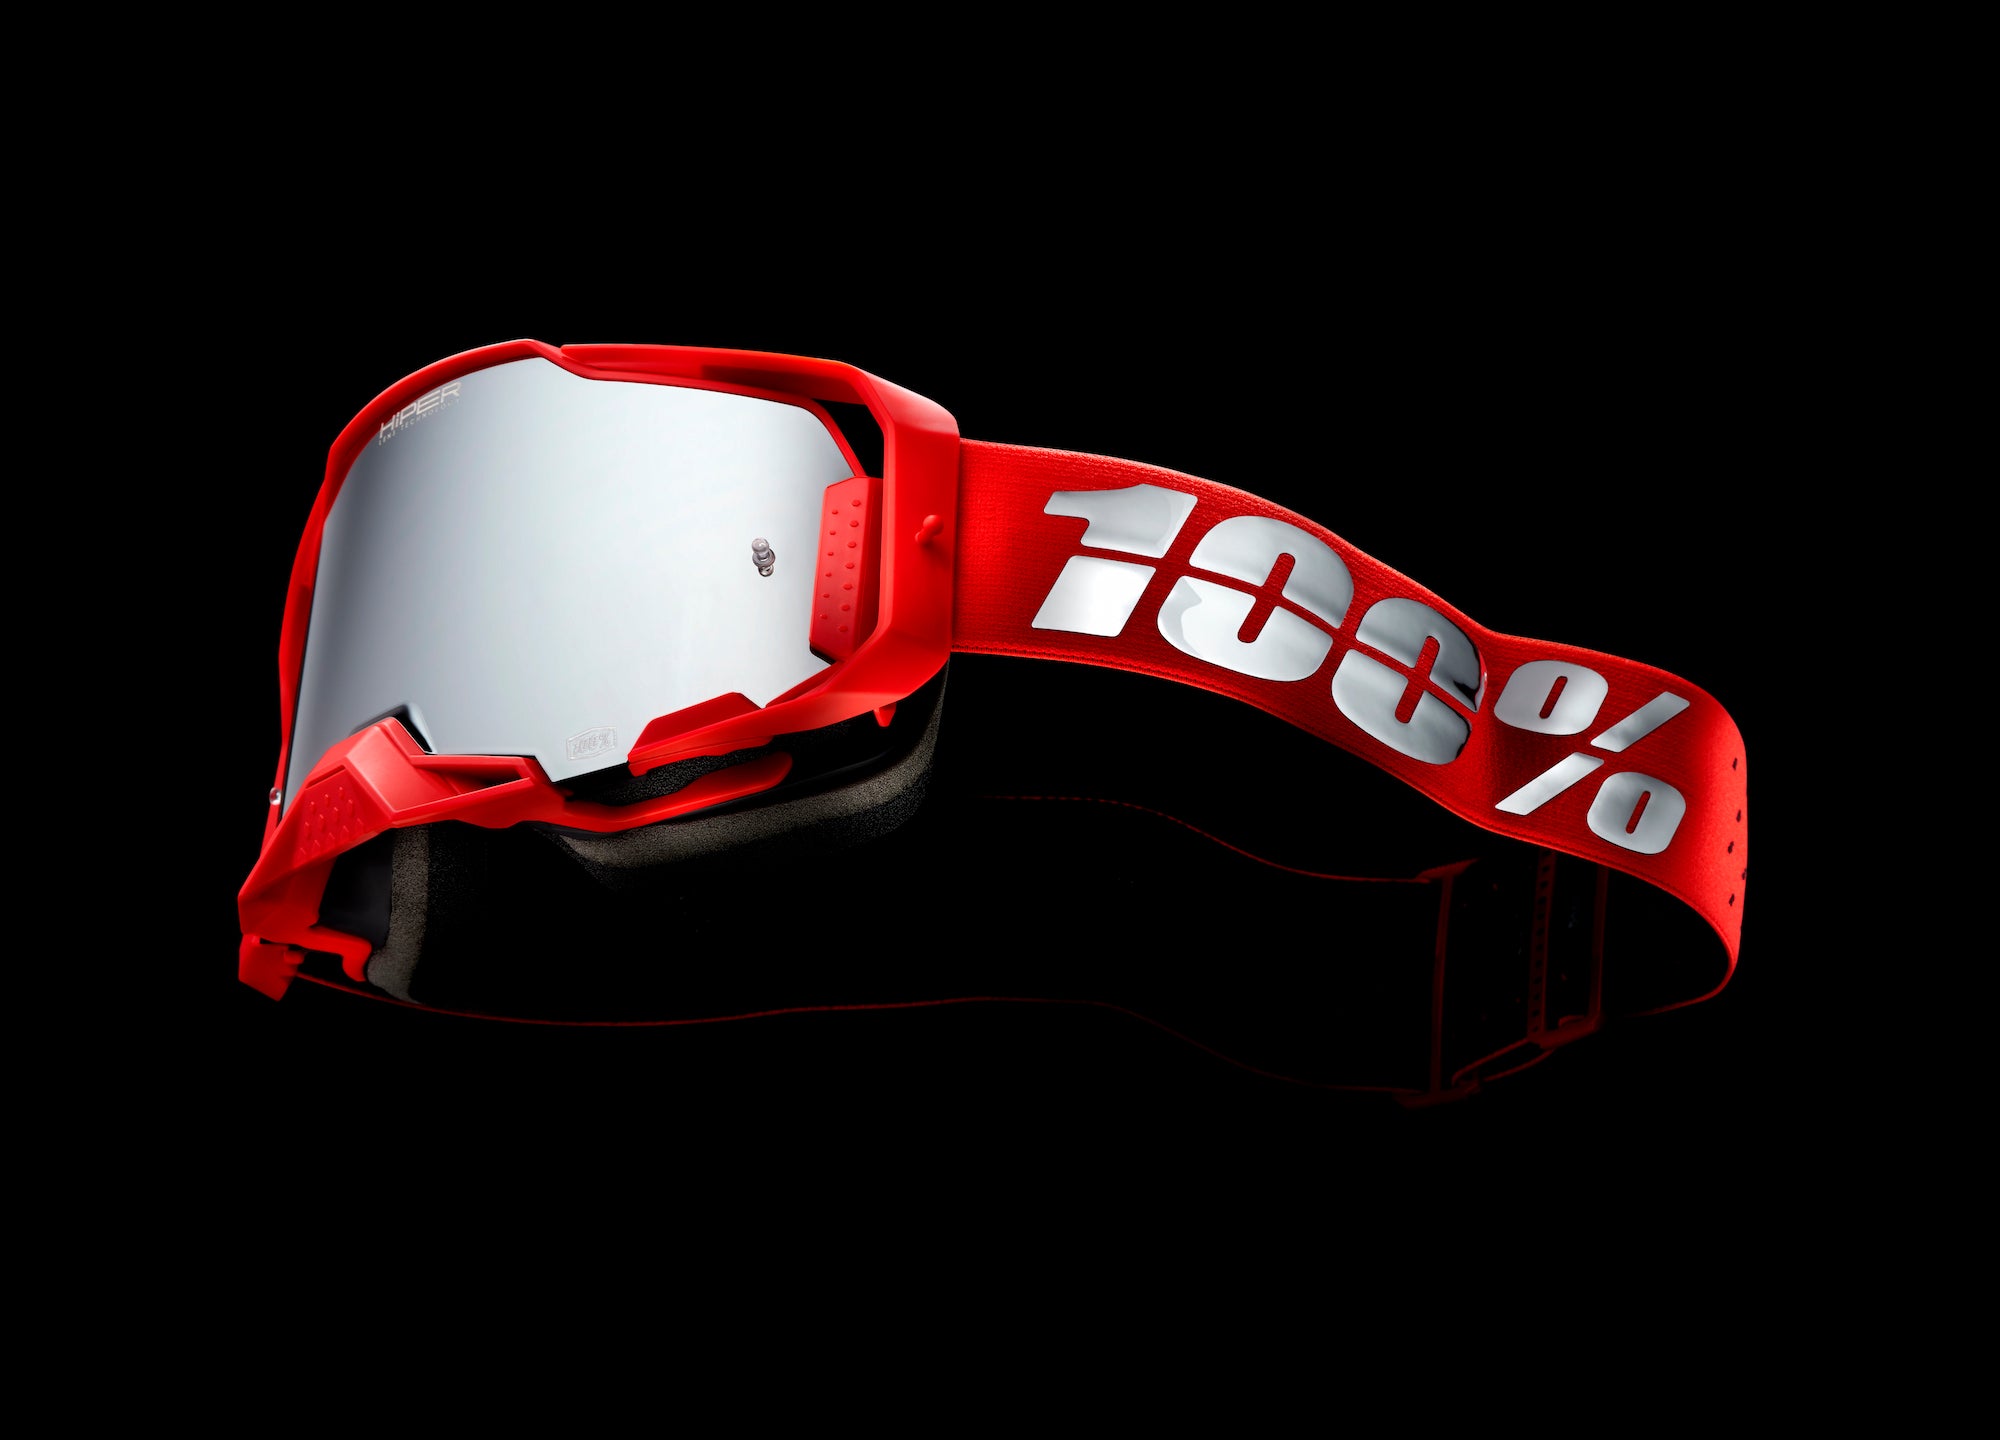 Introducing the Spring20 Goggle Collection